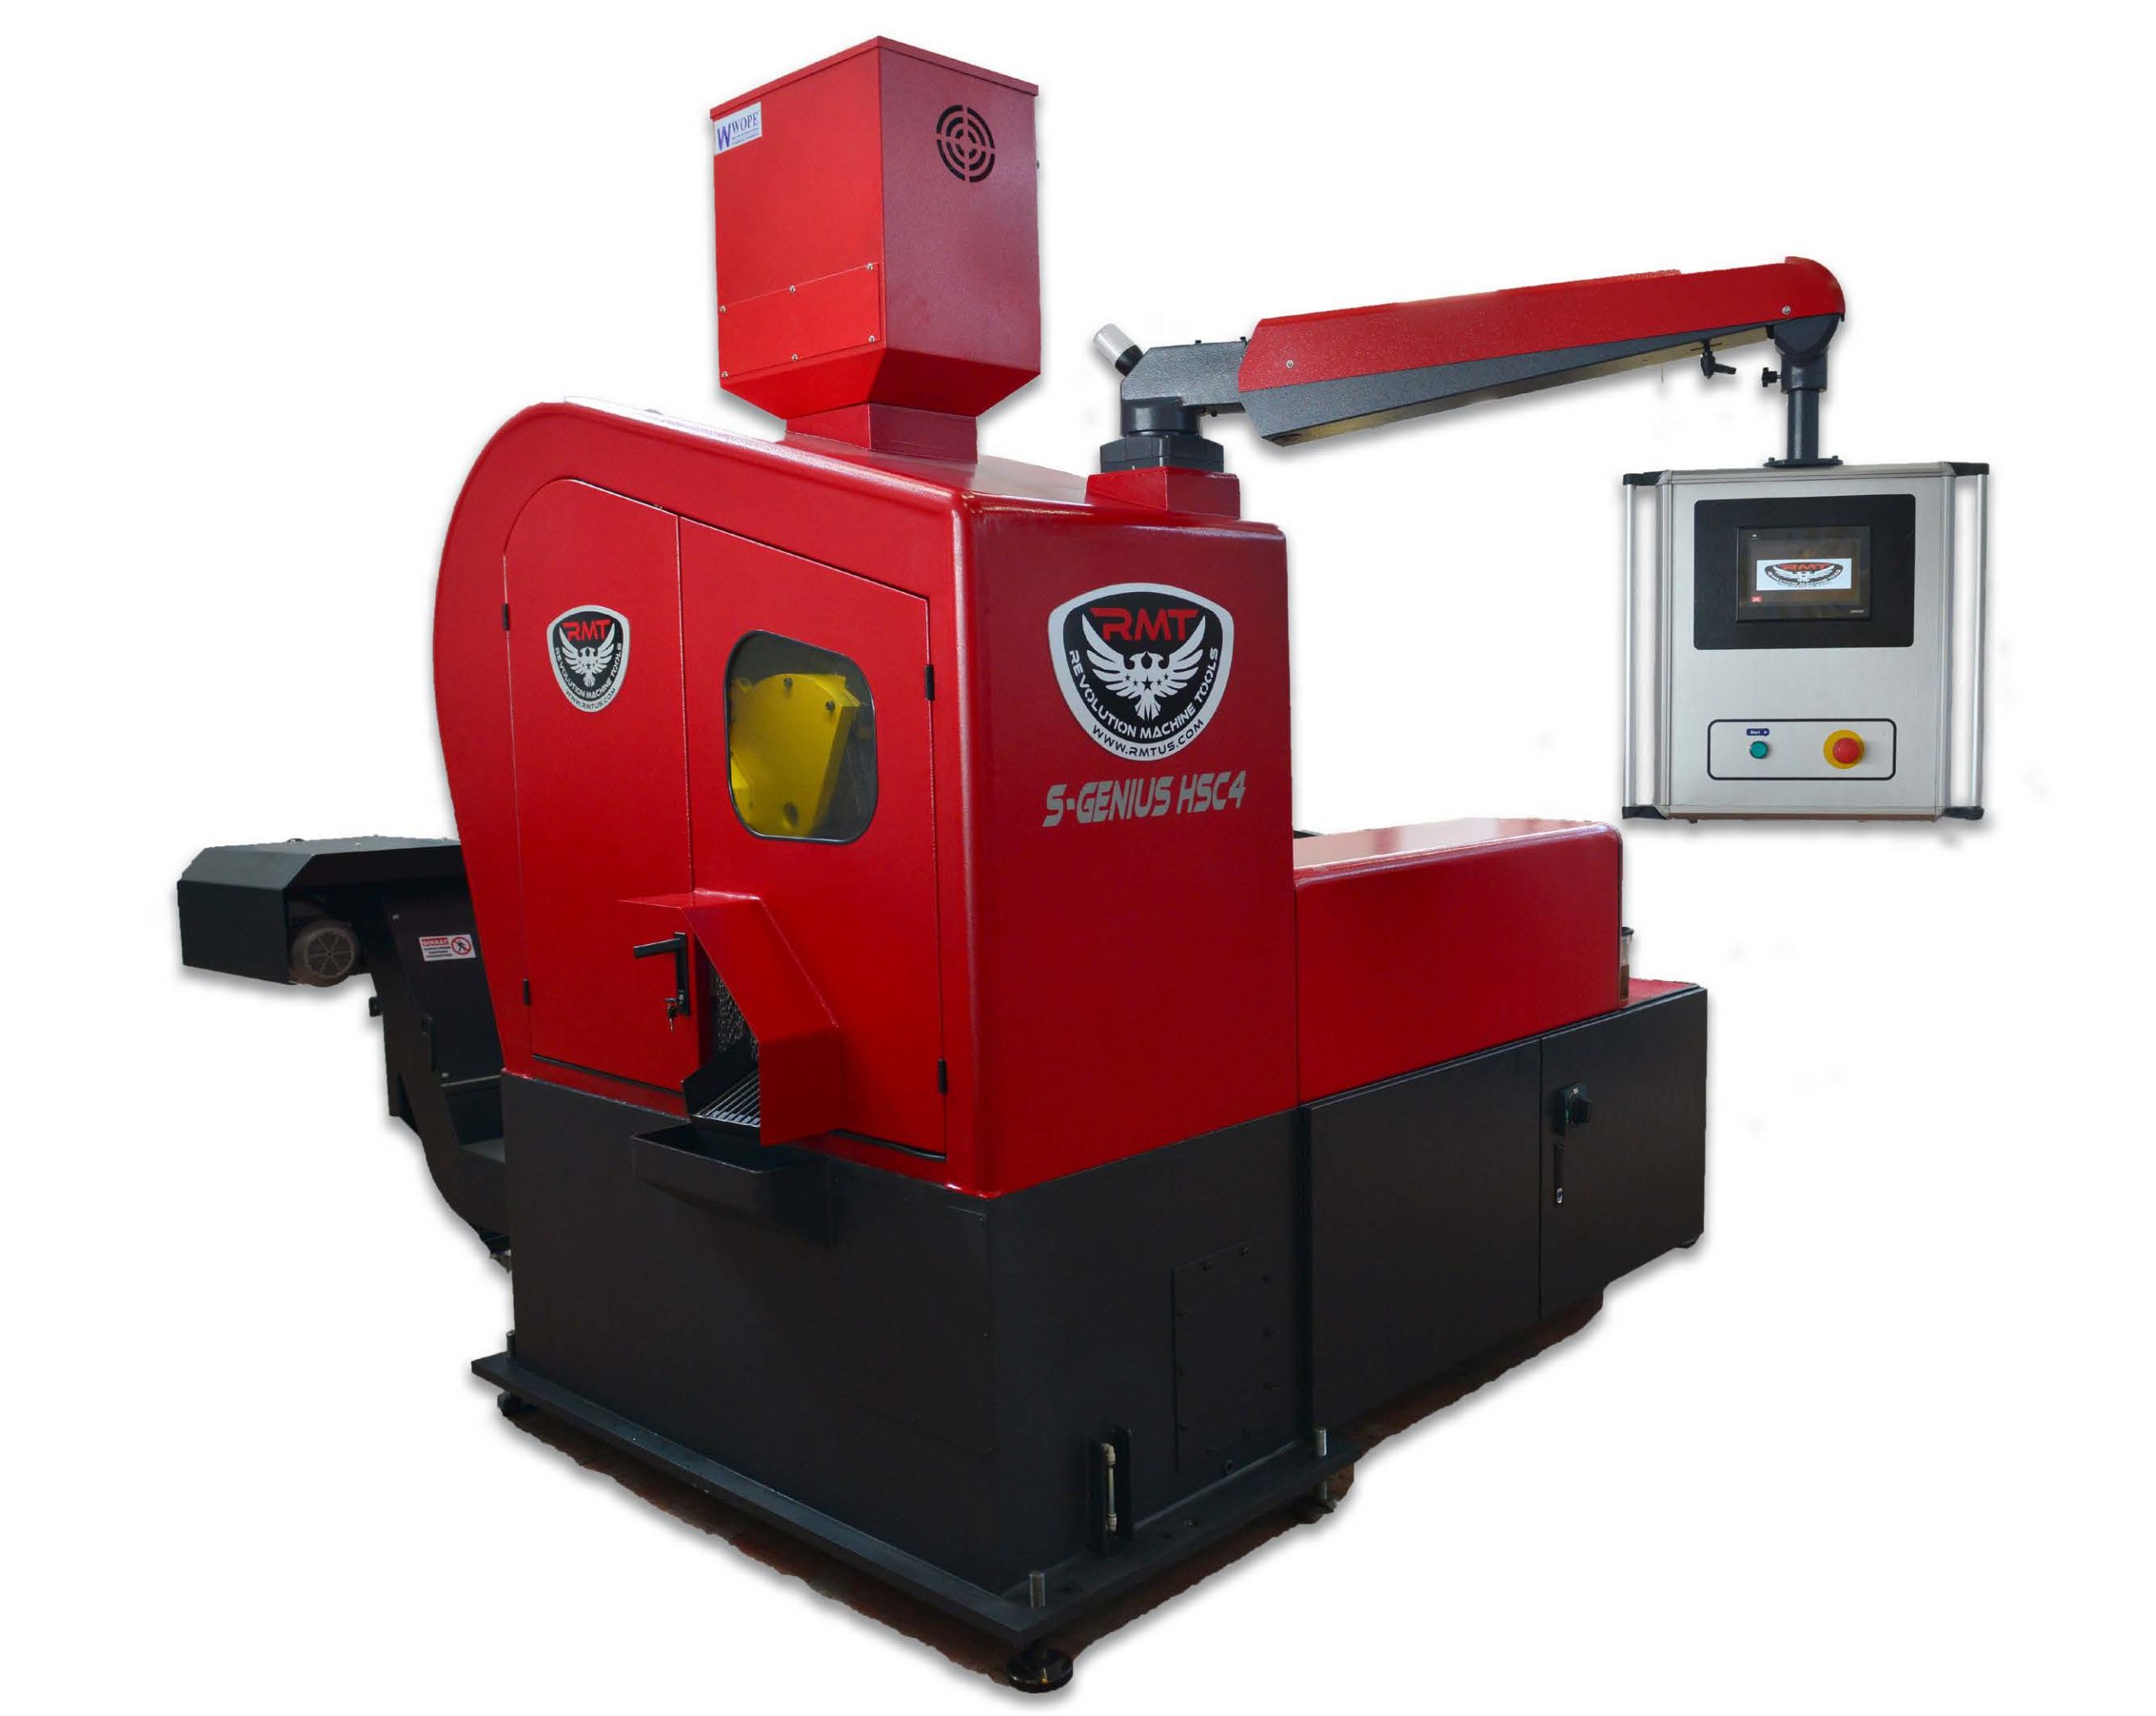 RMT Cold Saw